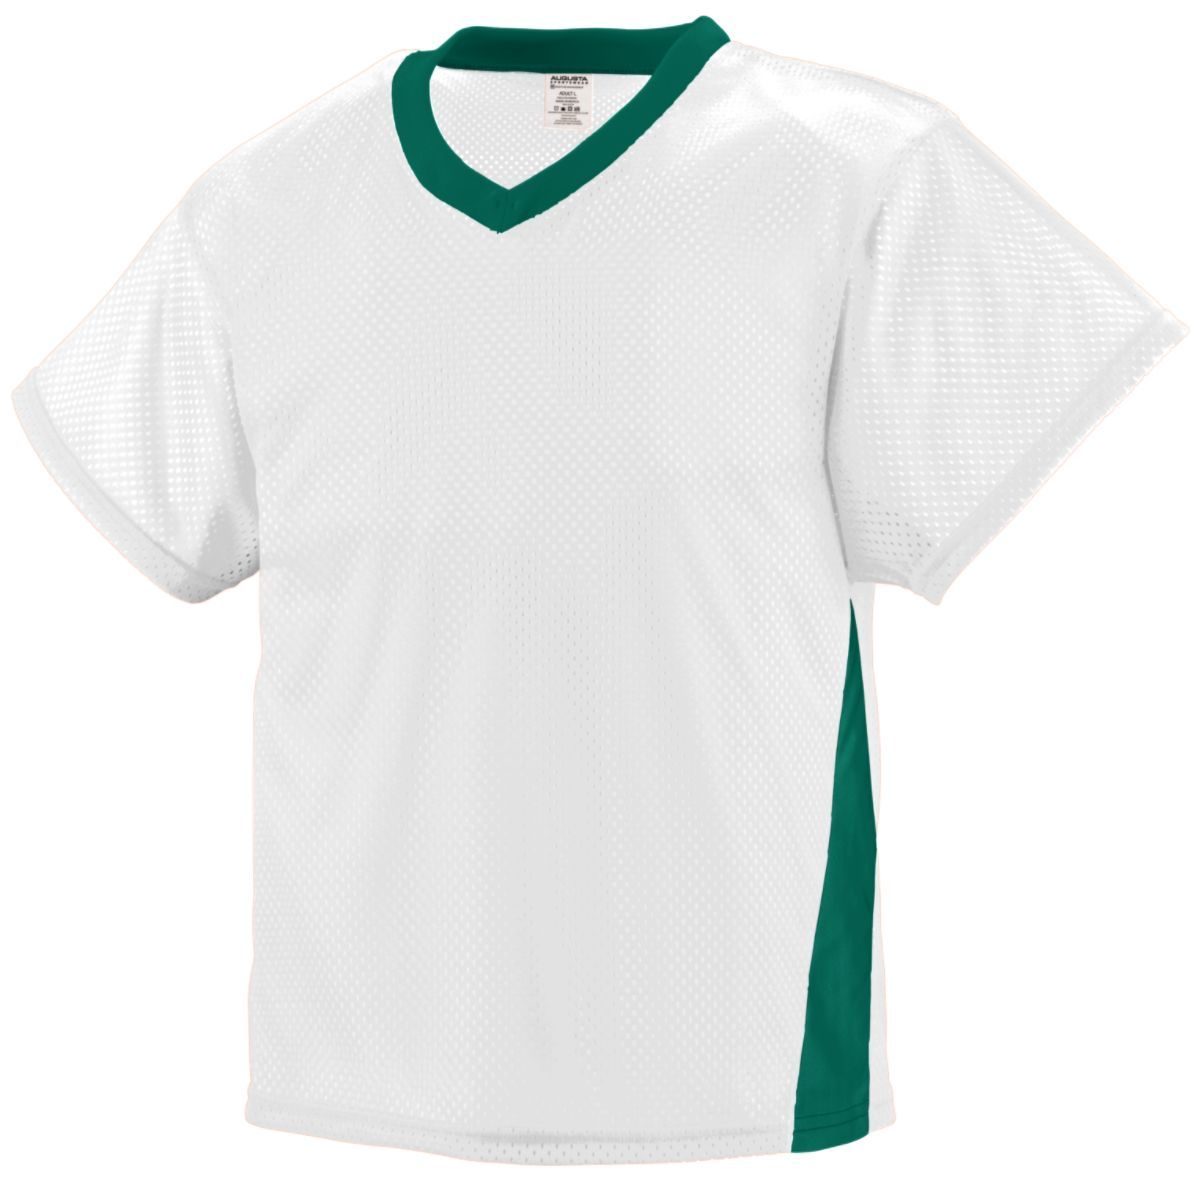 Augusta Sportswear High Score Jersey in White/Dark Green  -Part of the Adult, Adult-Jersey, Augusta-Products, Lacrosse, Shirts, All-Sports, All-Sports-1 product lines at KanaleyCreations.com